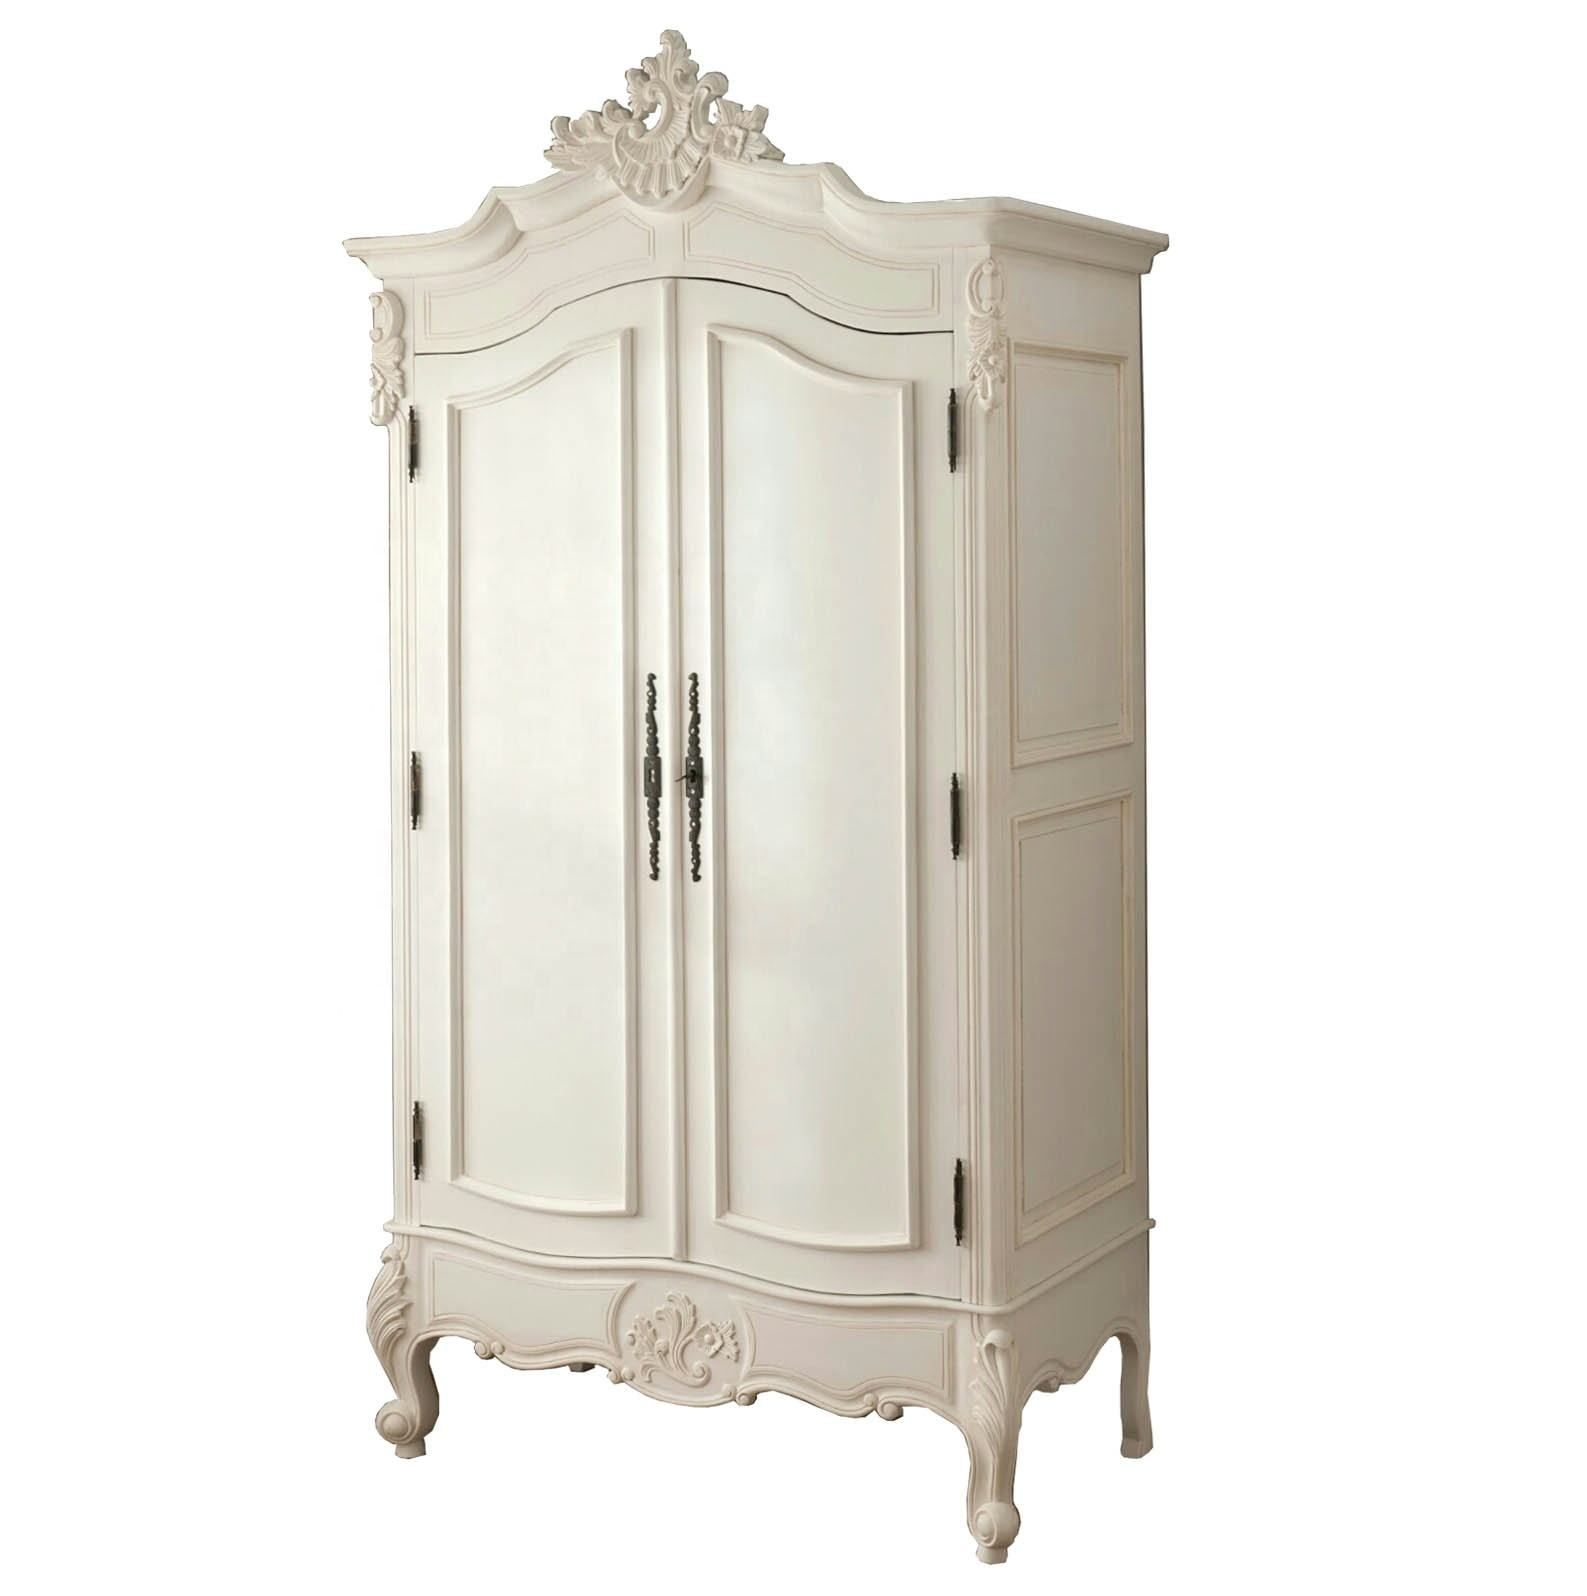 Source Antique White Painted French Style Armoire Wooden Wardrobes 2 Doors  On M (View 13 of 15)